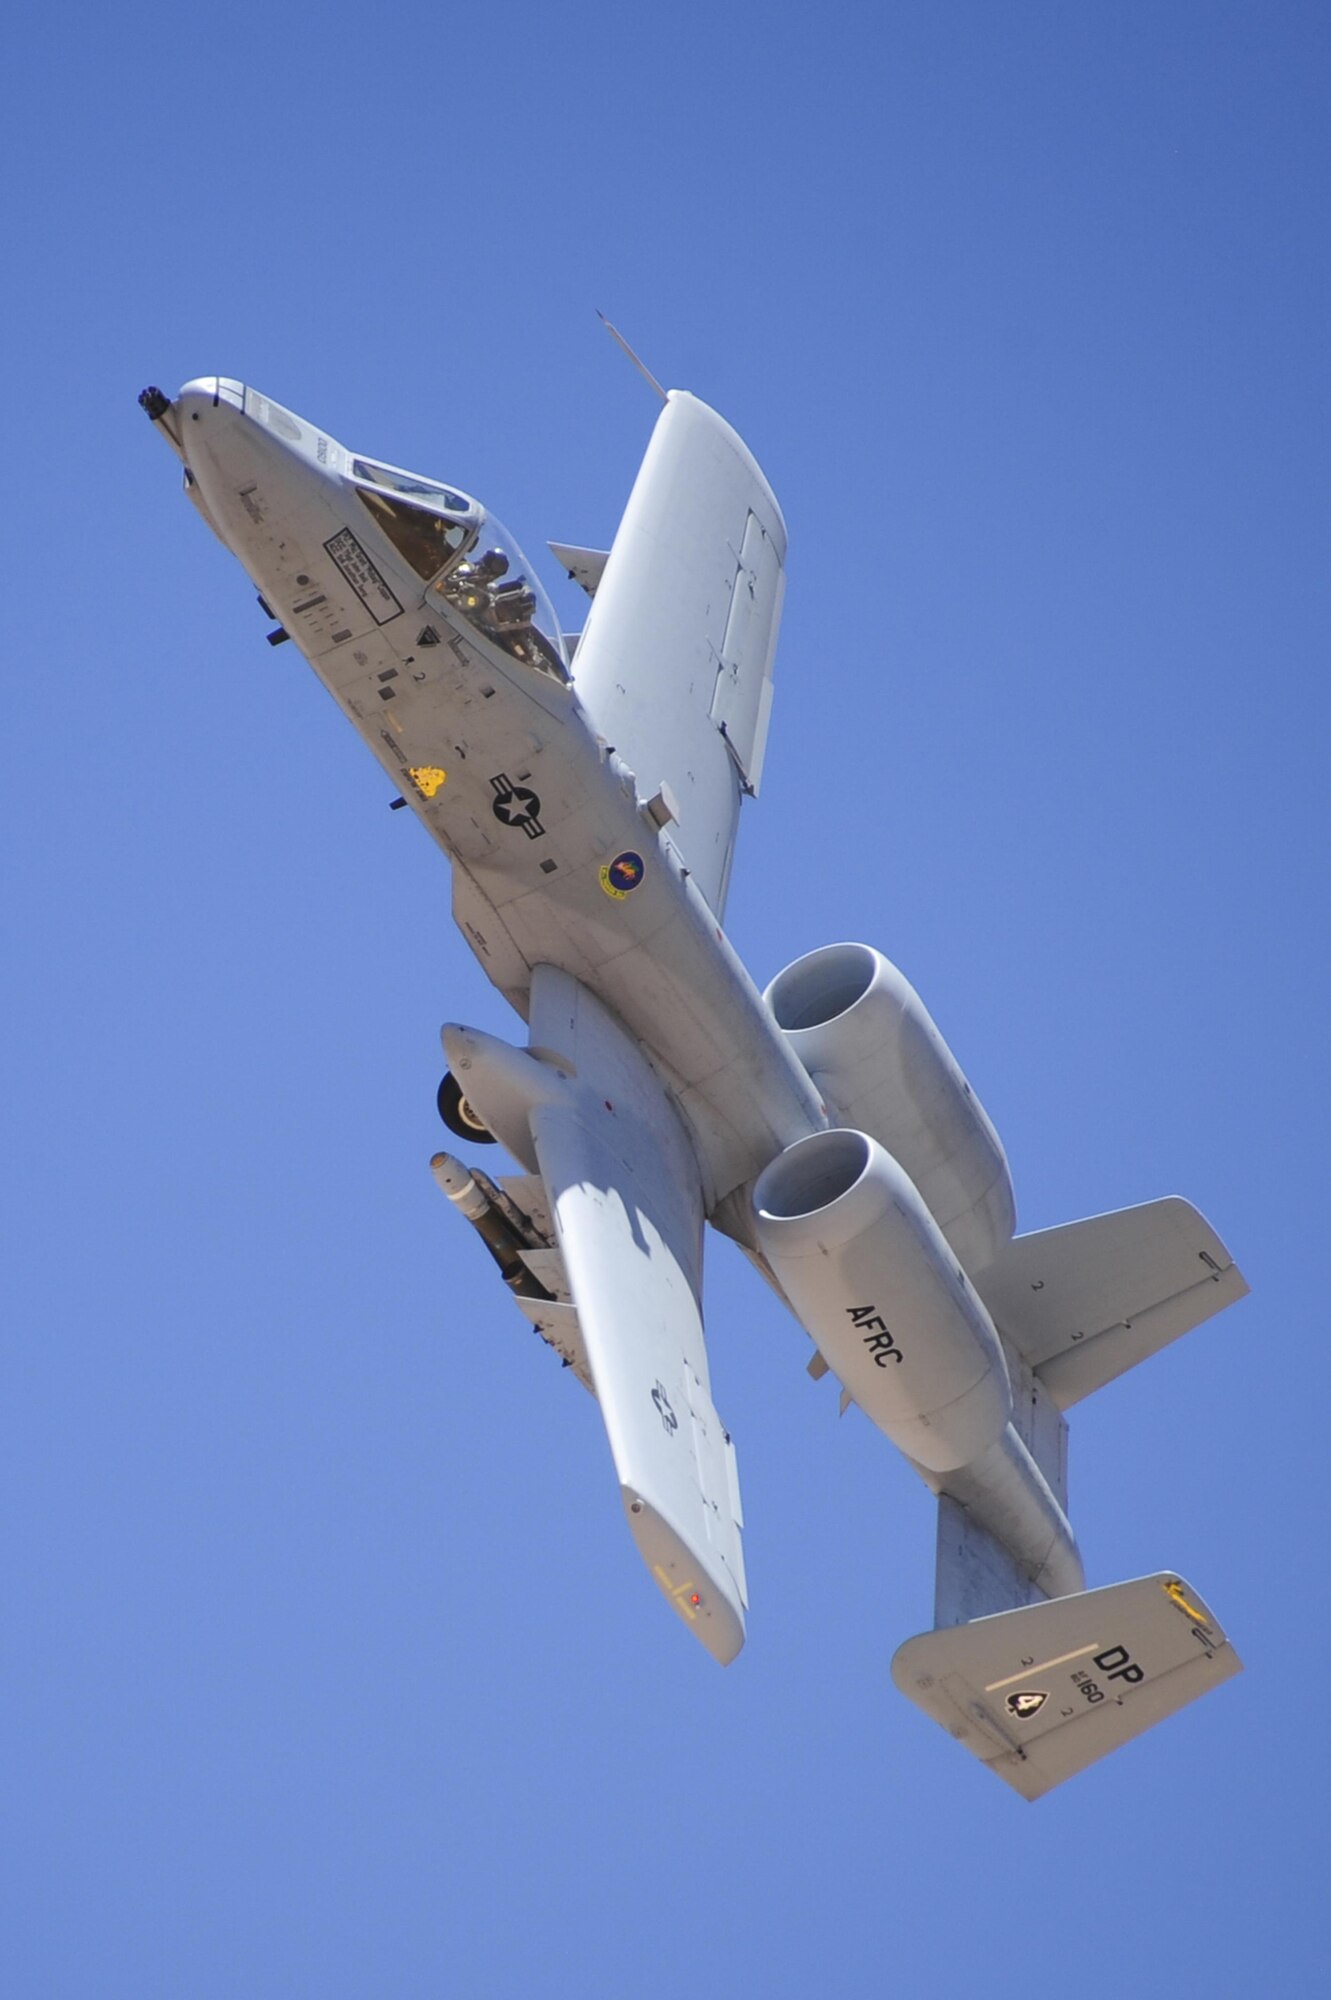 An A-10C Thunderbolt II from the 47th Fighter Squadron banks left after performing a low-angle strafe at the Barry M. Goldwater Range, Ariz., June 2, 2016. The 47th FS went on to win their second consecutive Hawgsmoke competition. (U.S. Air Force photo by Senior Airman Chris Drzazgowski/Released)